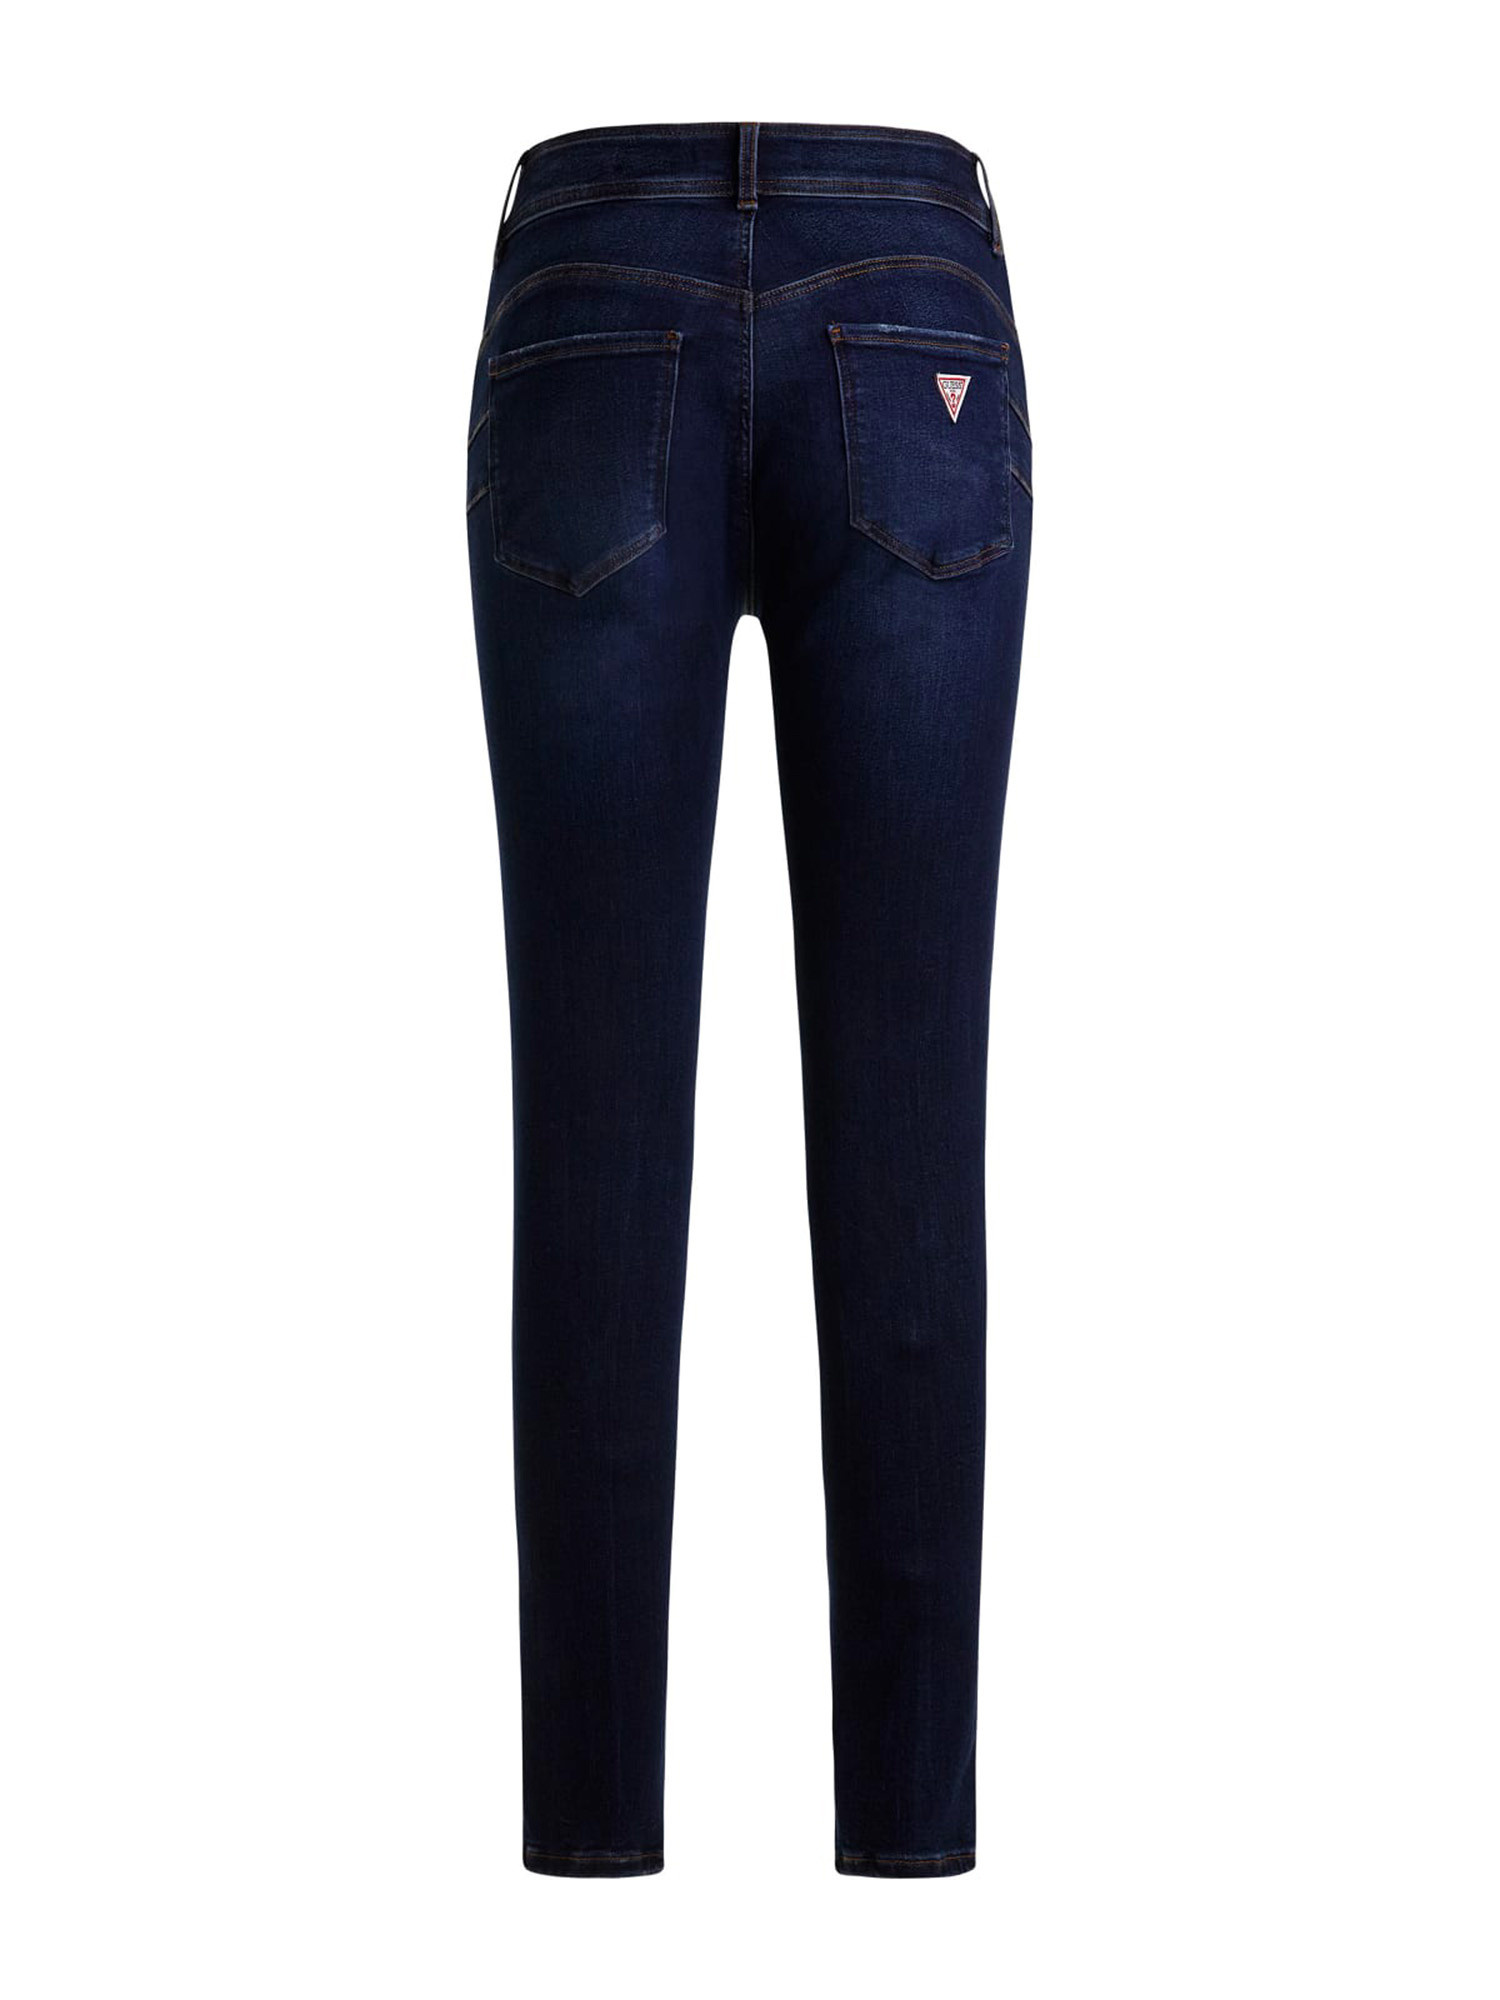 Guess - Jeans 5 tasche skinny, Blu scuro, large image number 1